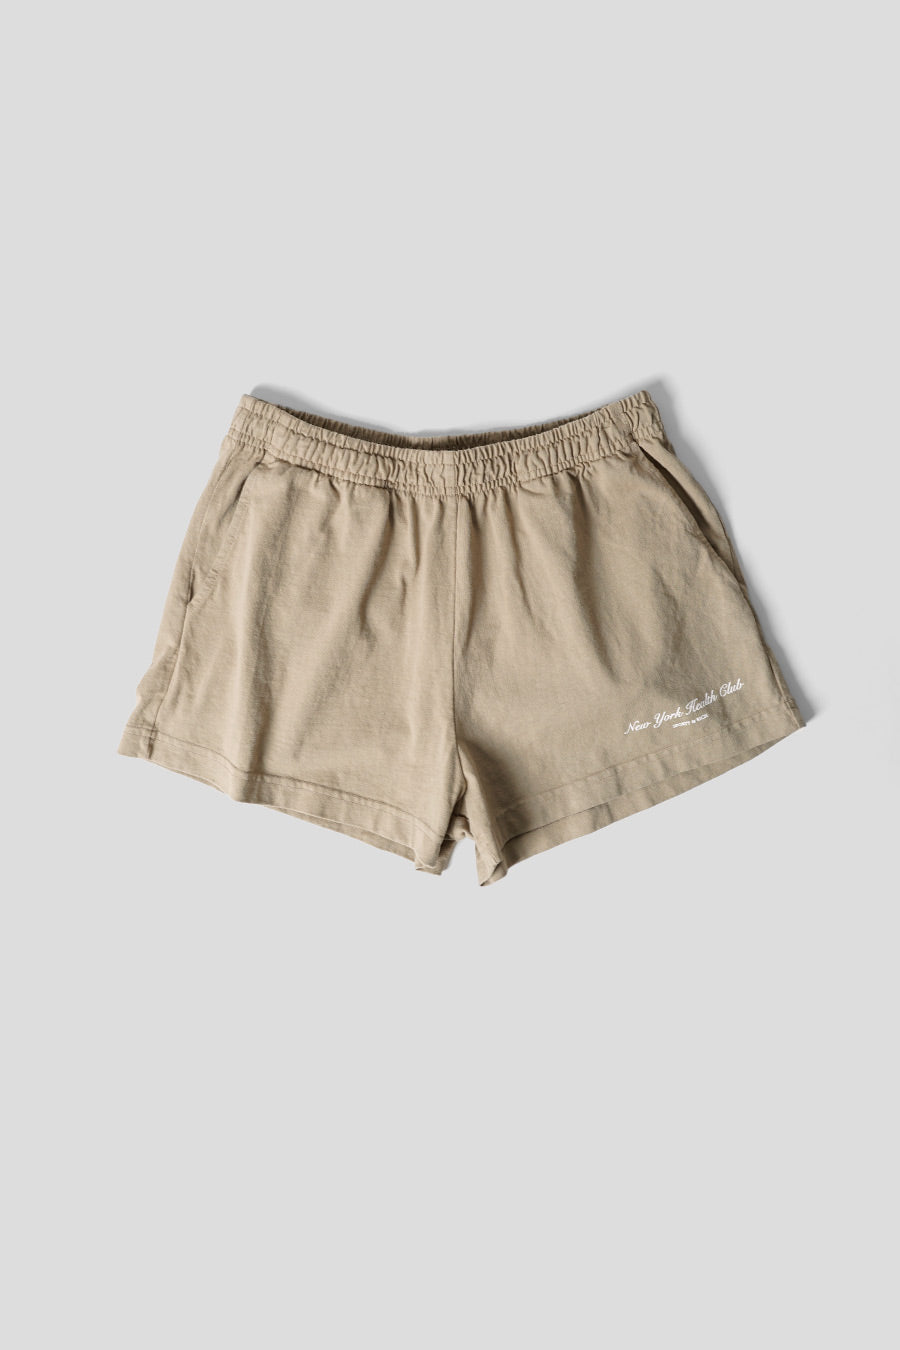 Sporty & Rich - NY HEALTH CLUB SHORTS BEIGE - LE LABO STORE